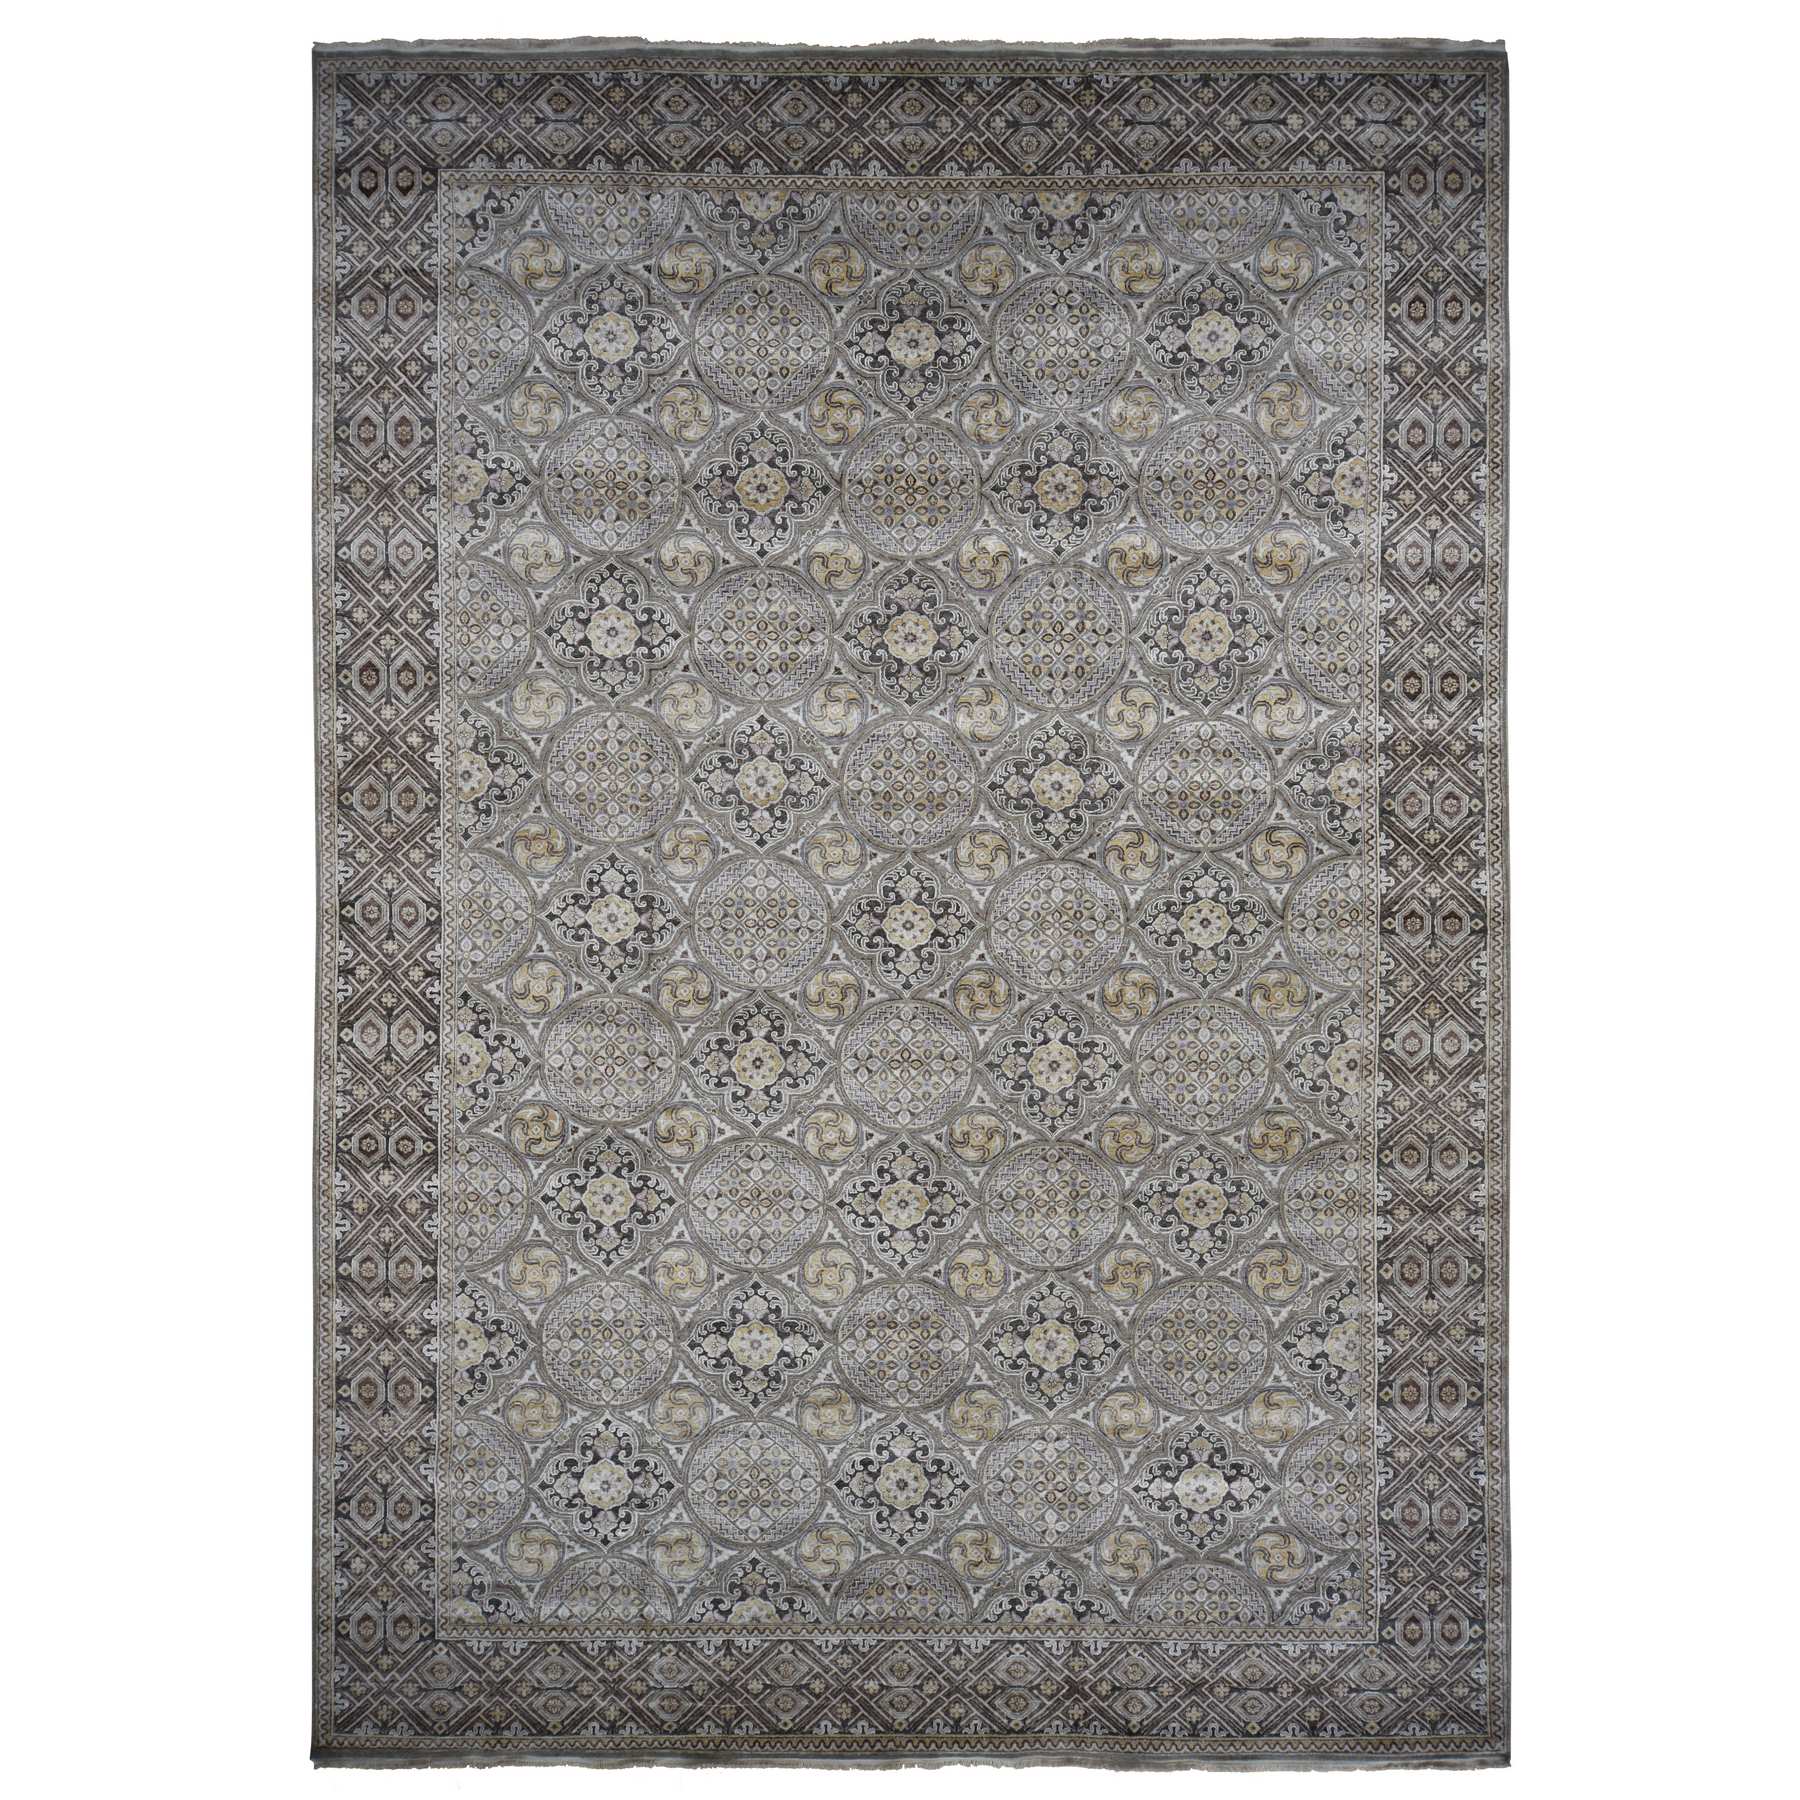  Silk Hand-Knotted Area Rug 11'10